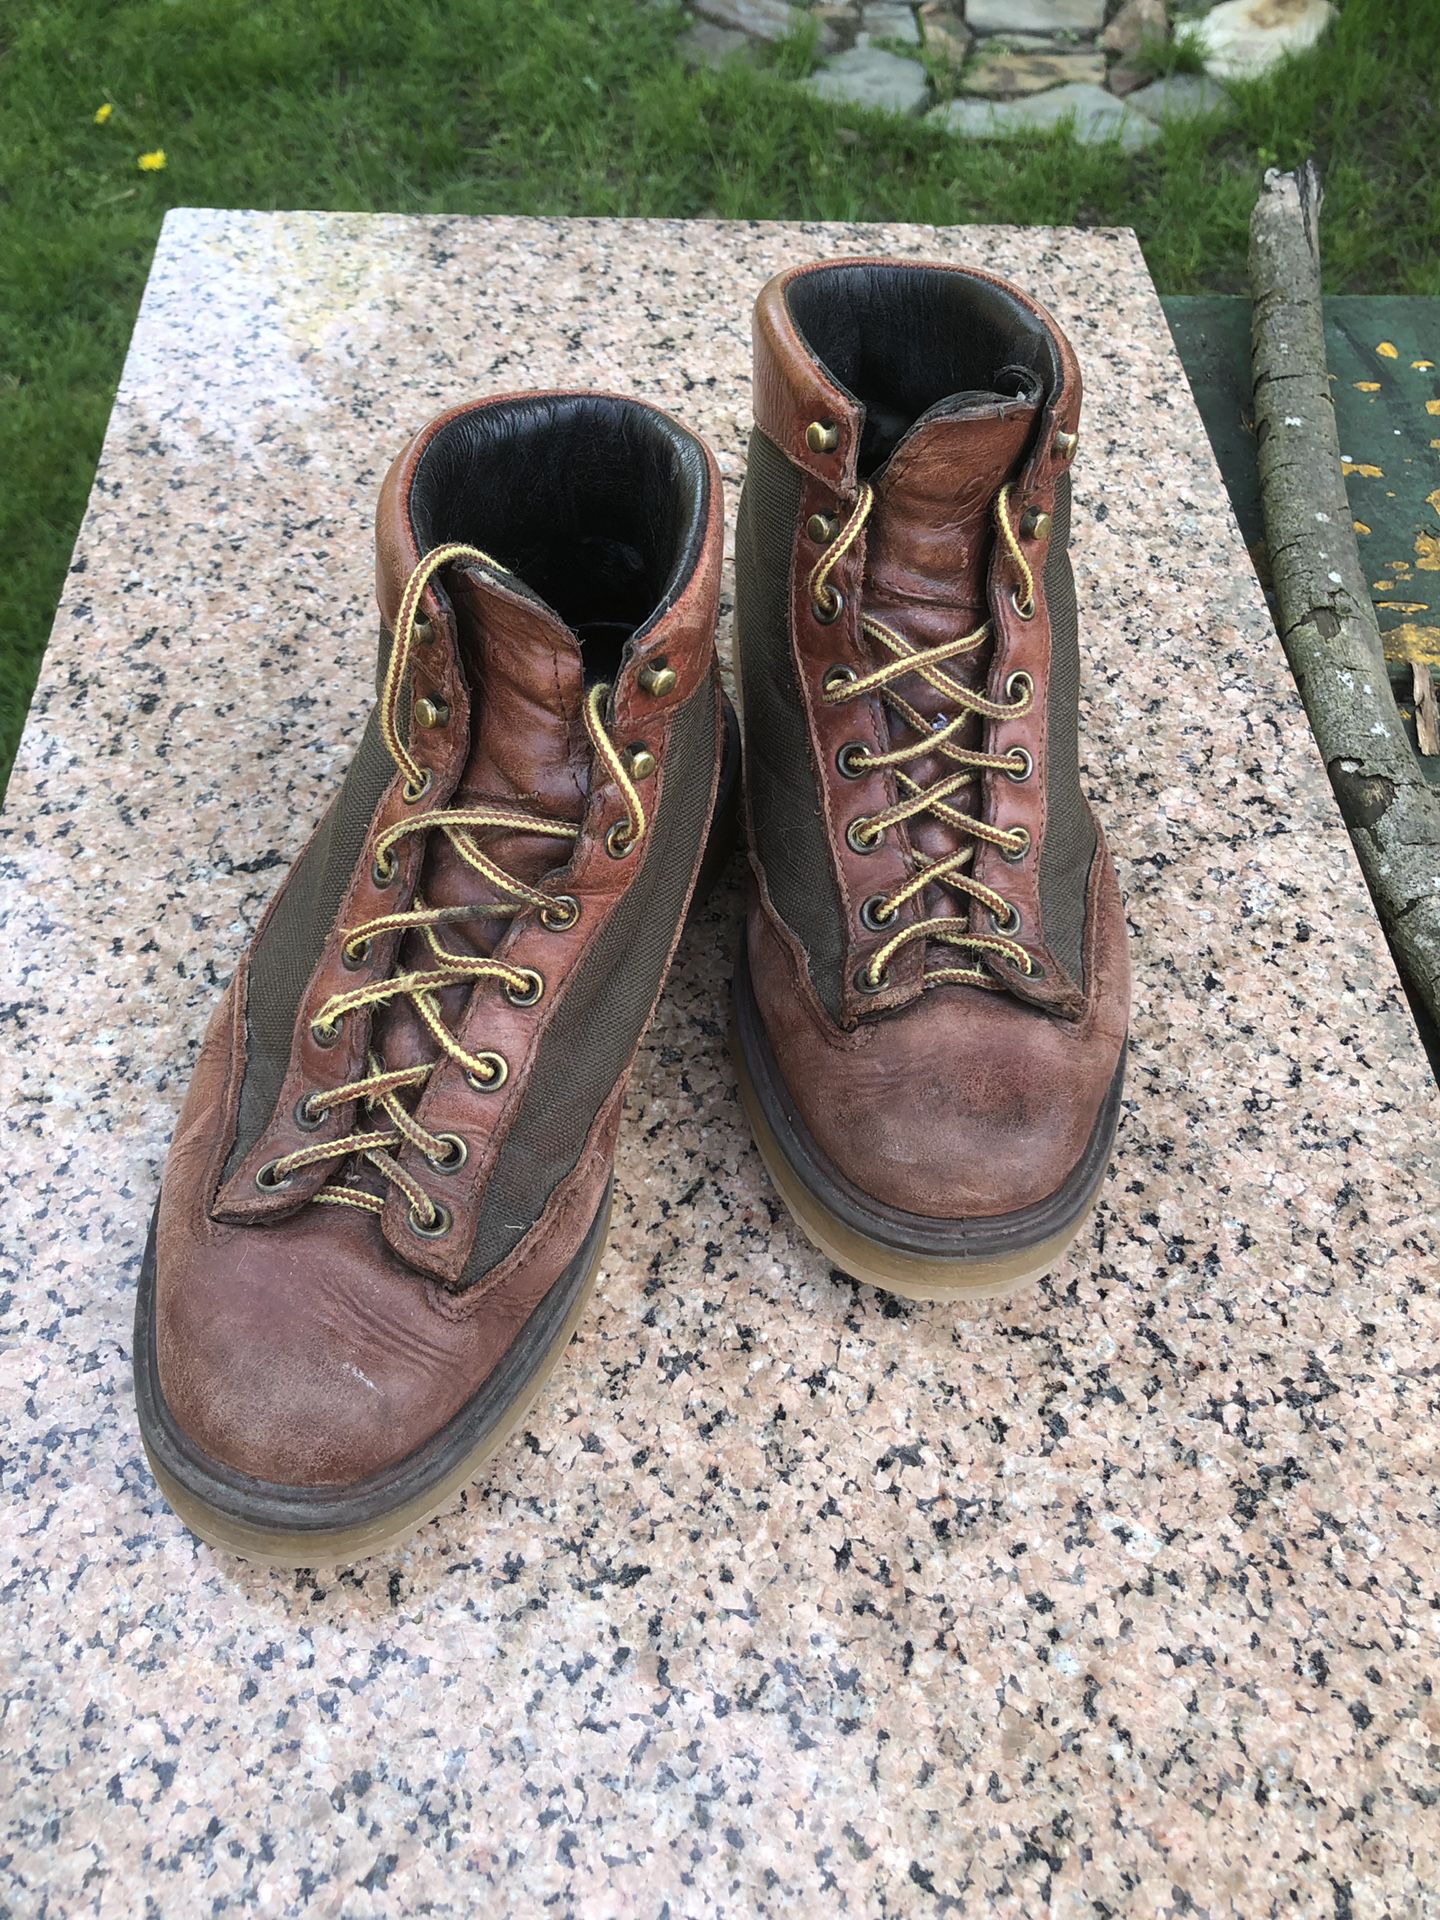 Danner Leather Lace Up Hiking Boots with Light Weight Vibram Sole Men’s Size 7 ⚡️🥾